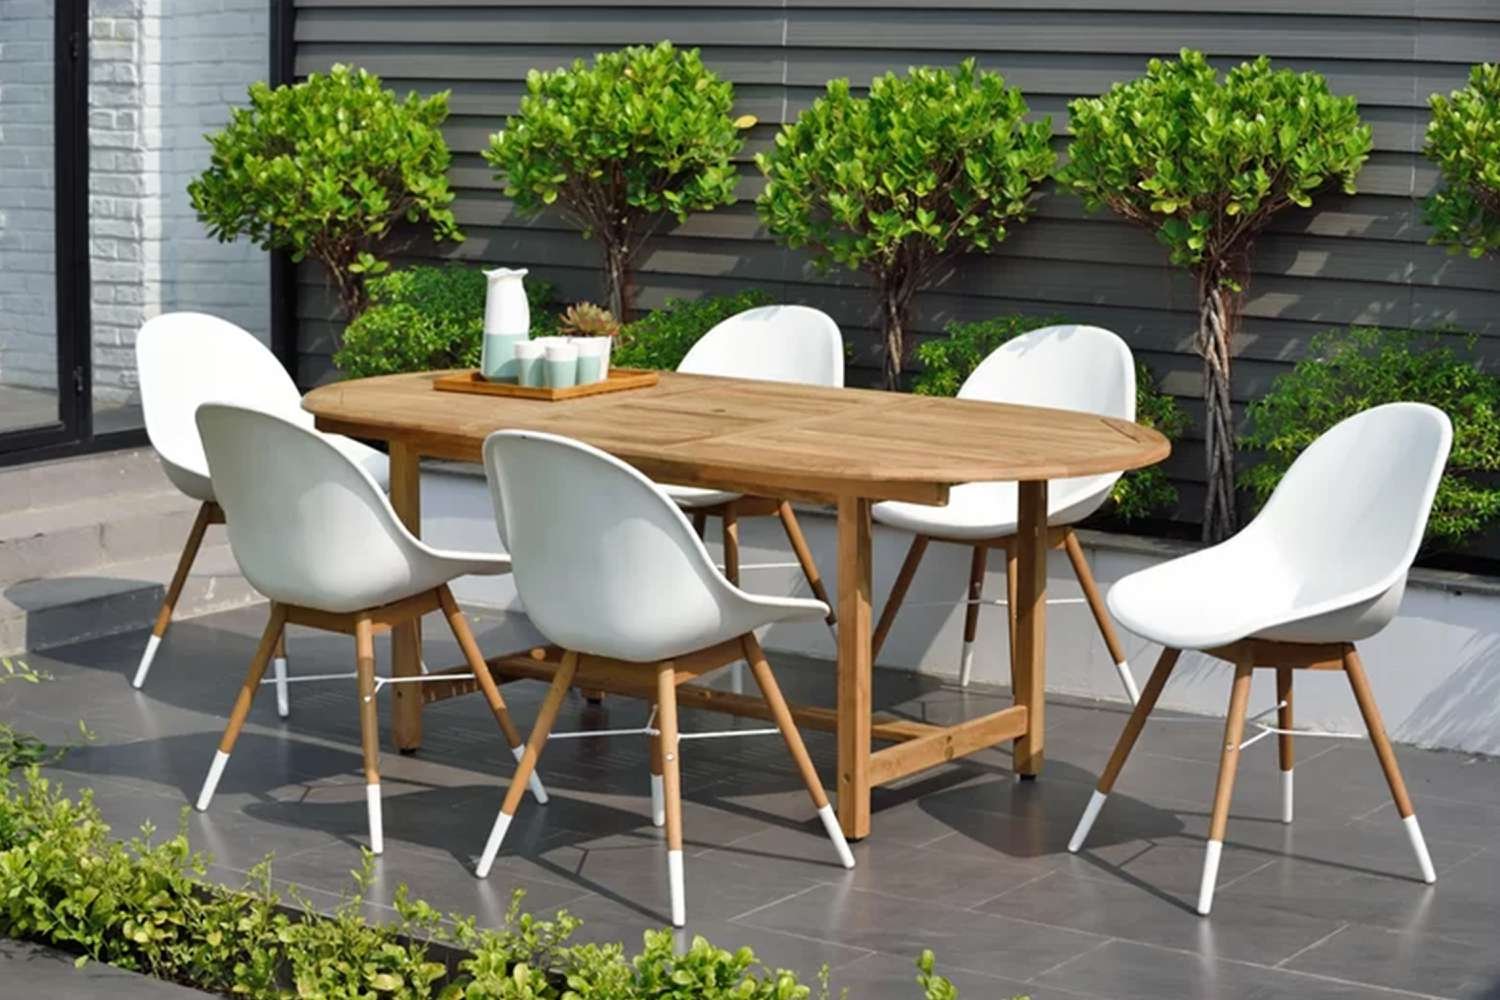 Outdoor Dining Essentials How to Choose Durable and Weather-Resistant Restaurant Patio Furniture